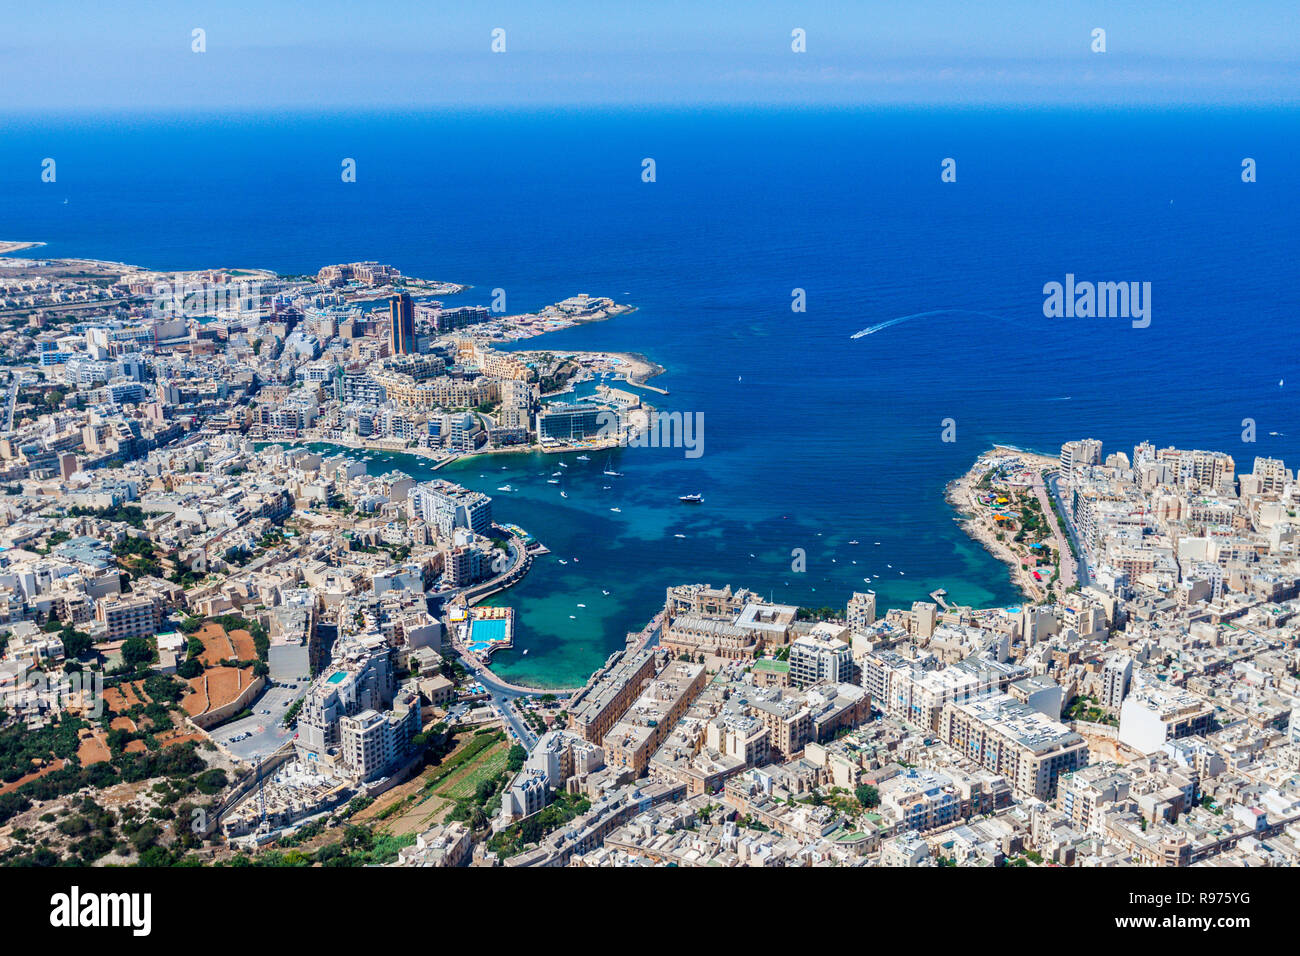 Malta aerial view. St. Julian's (San Giljan) and Tas-Sliema cities. St. Julian’s bay, Balluta bay, Spinola bay, Towns, harbours and coastline of Malta from above. Skyscraper in Paceville district. Stock Photo